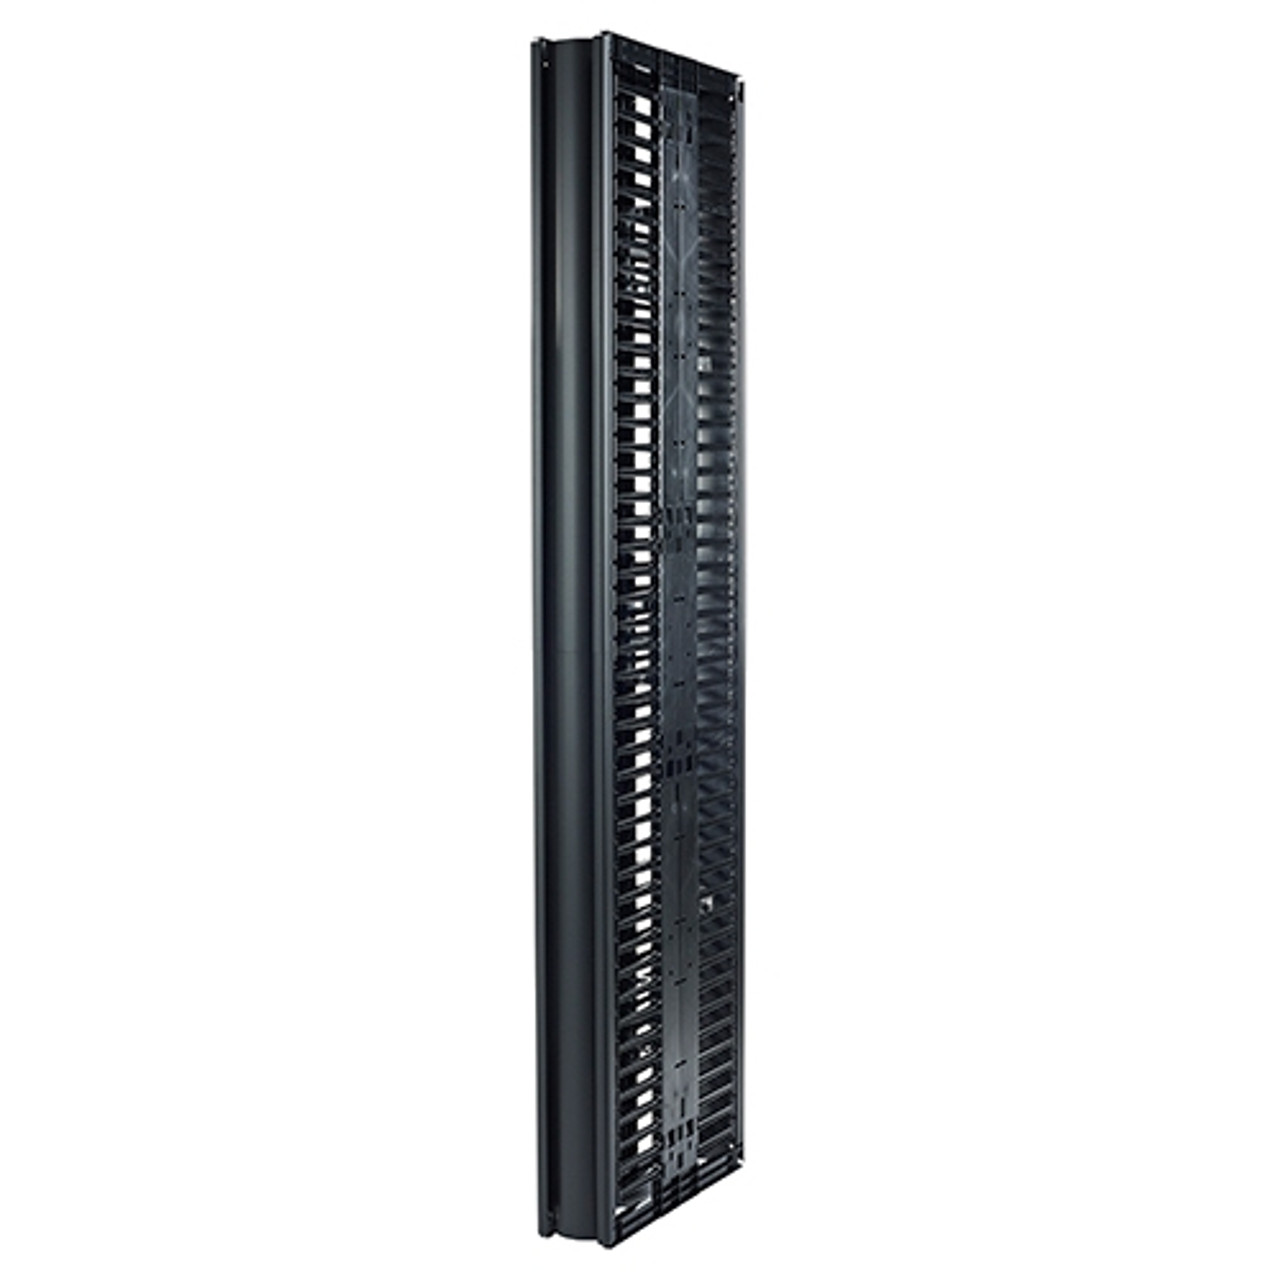 AR8725 APC Valueline 84-inch x 6-inch Vertical Cable Manager (Refurbished)